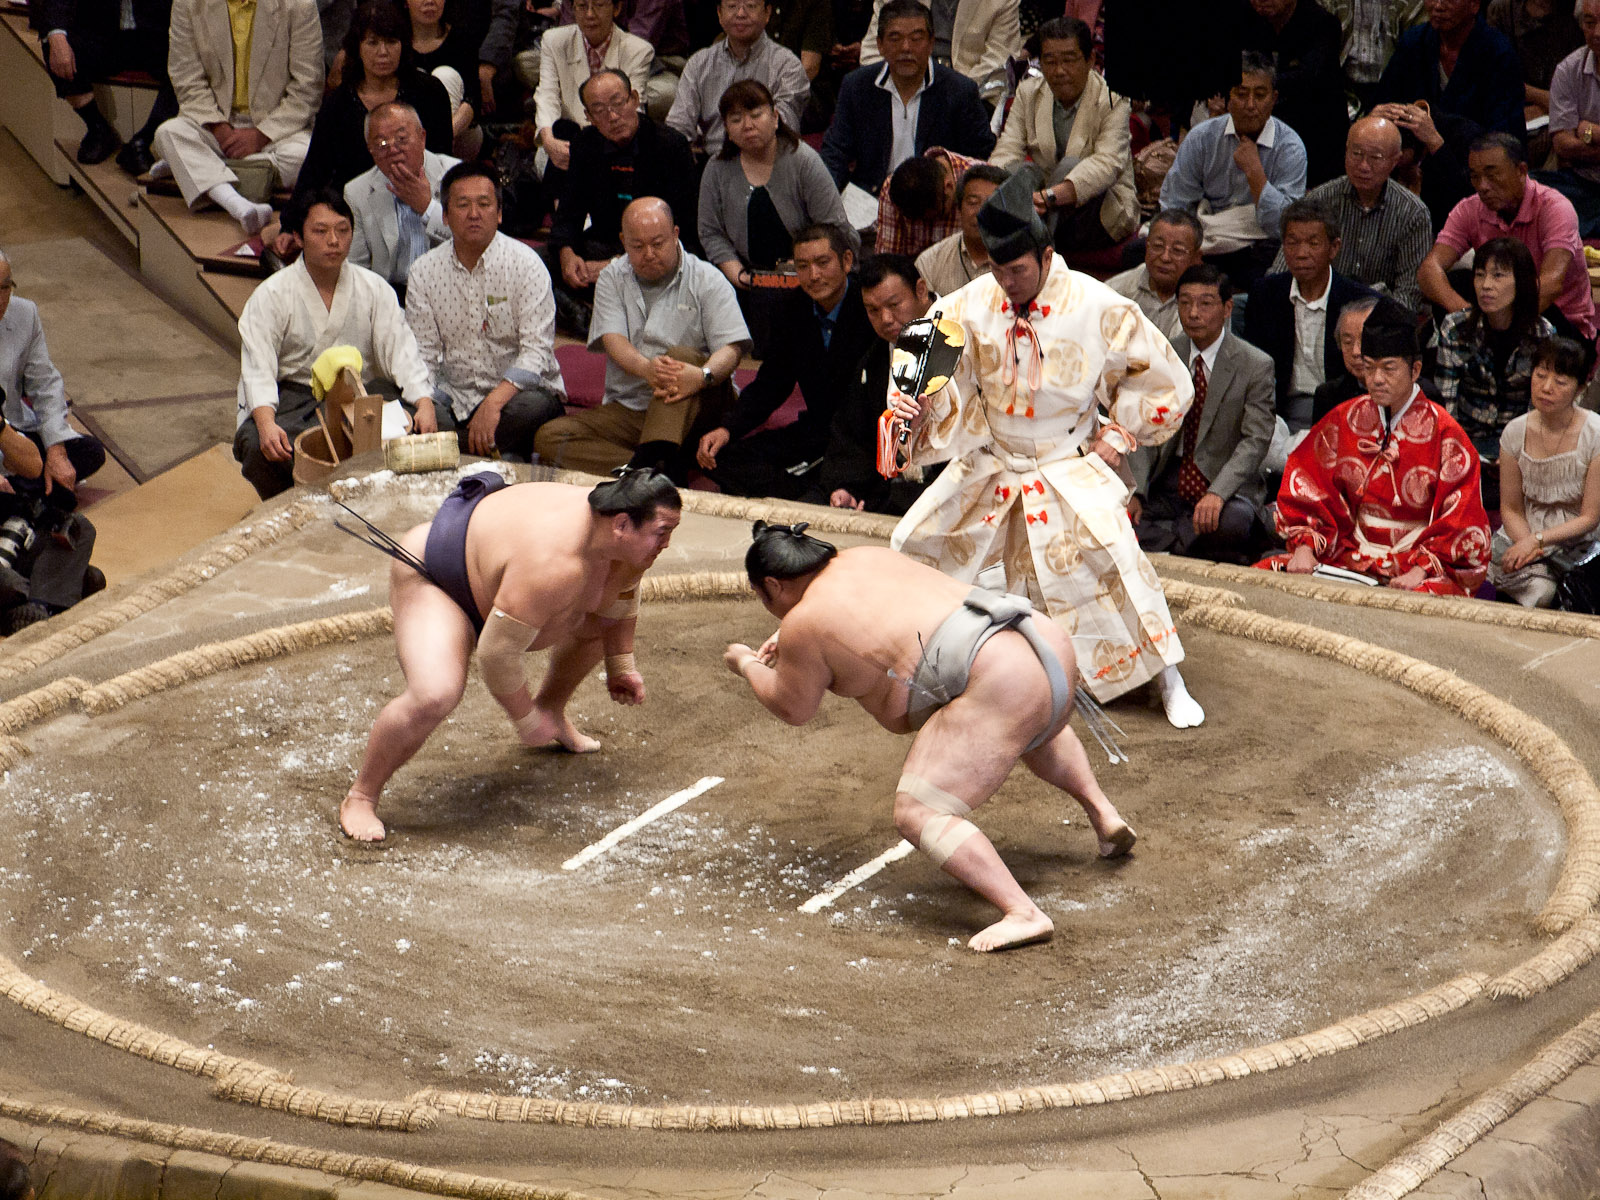 Sumo-Wrestler offers to retire after clubs visits: Kyodo